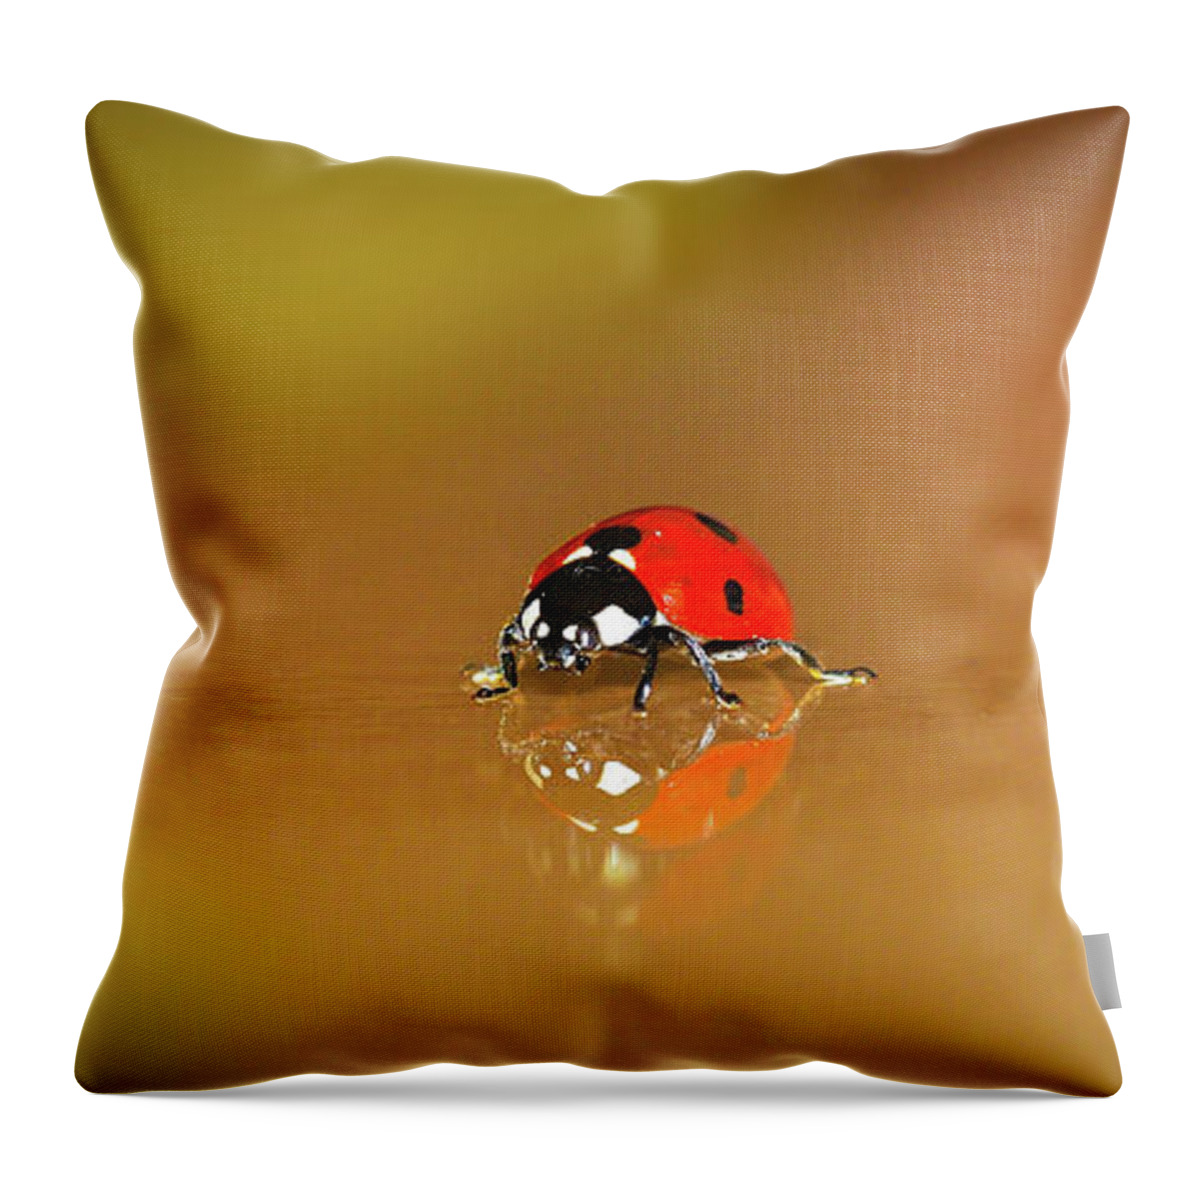 Lady Bug Throw Pillow featuring the photograph Colorful Red Ladybug Art by Wall Art Prints